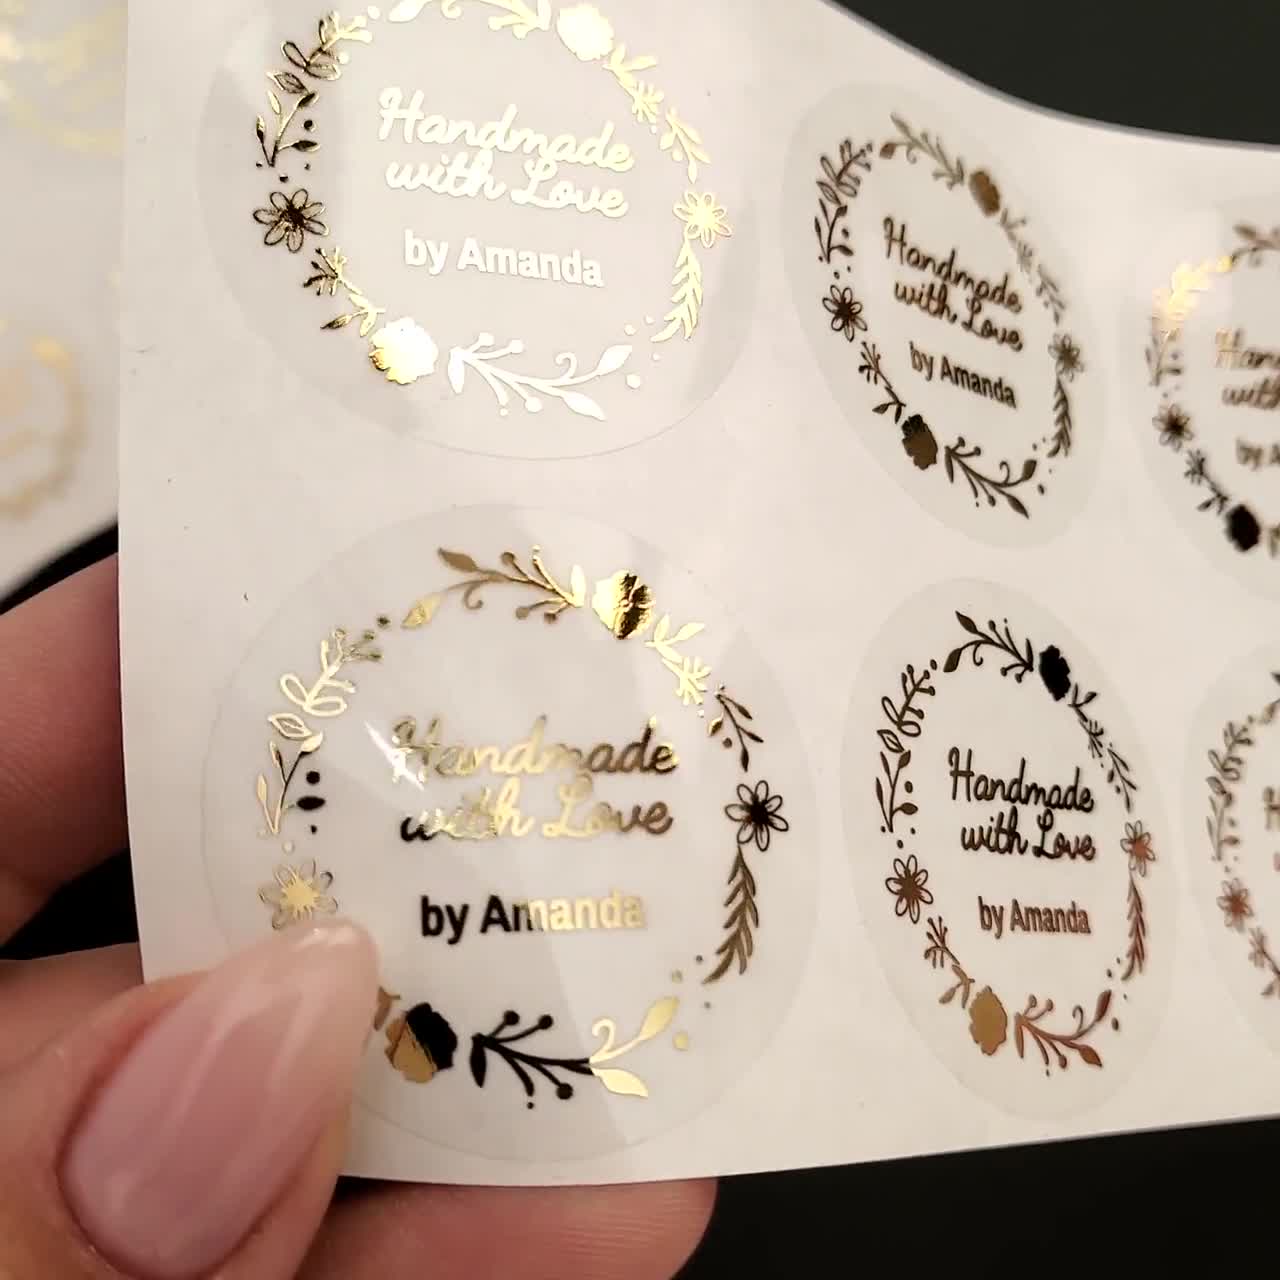 Handmade Rose Gold Foil Stickers Handmade With Love Foil Transparent Labels  Small Business Stickers Craft Labels, 100 Pcs/Lot